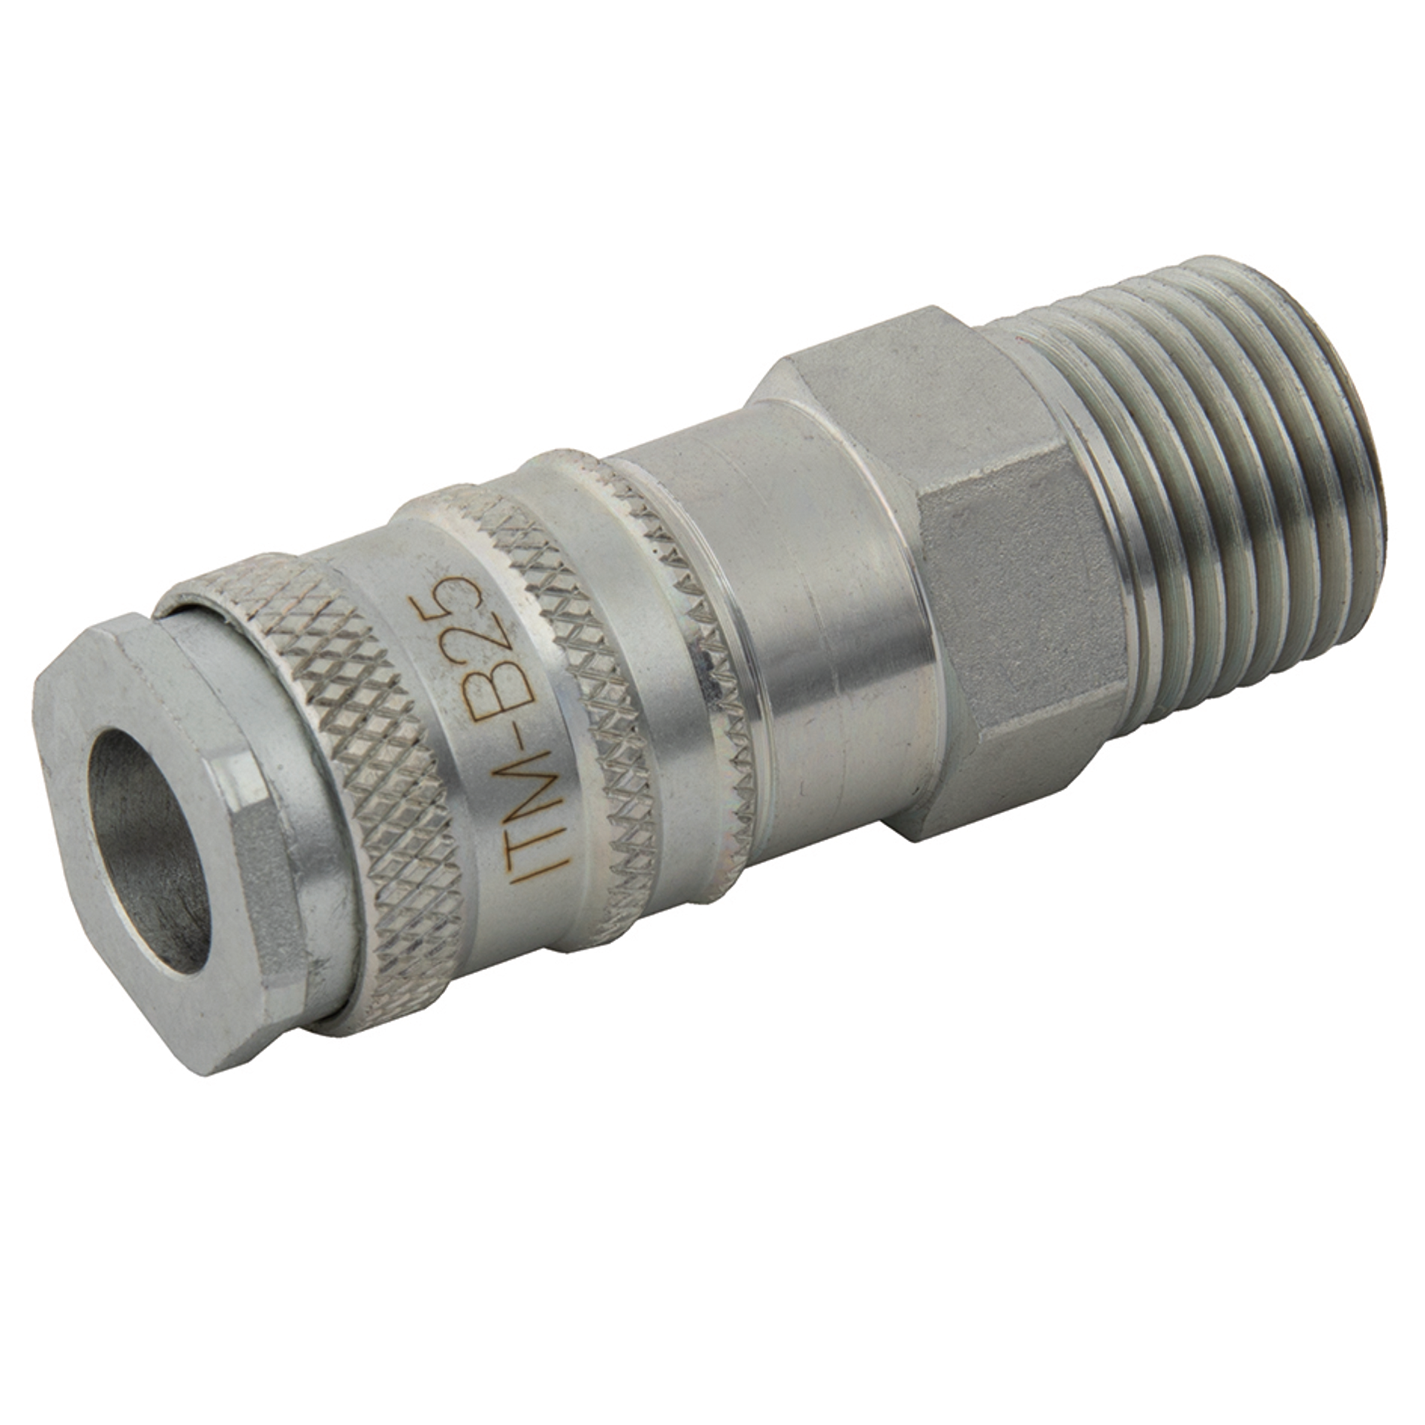 3/8" BSPP MALE SERIES-25COUPLING